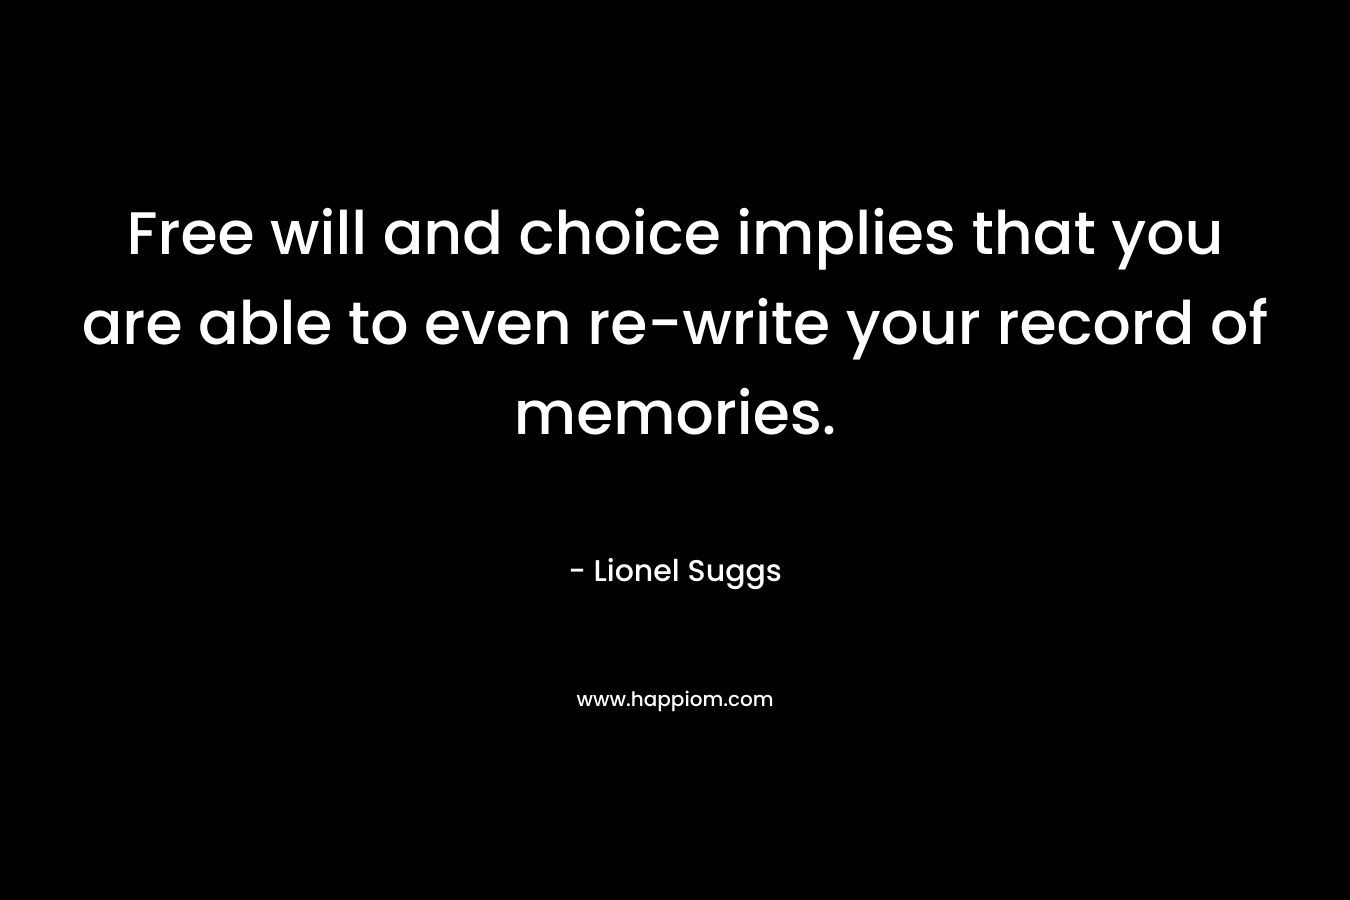 Free will and choice implies that you are able to even re-write your record of memories.